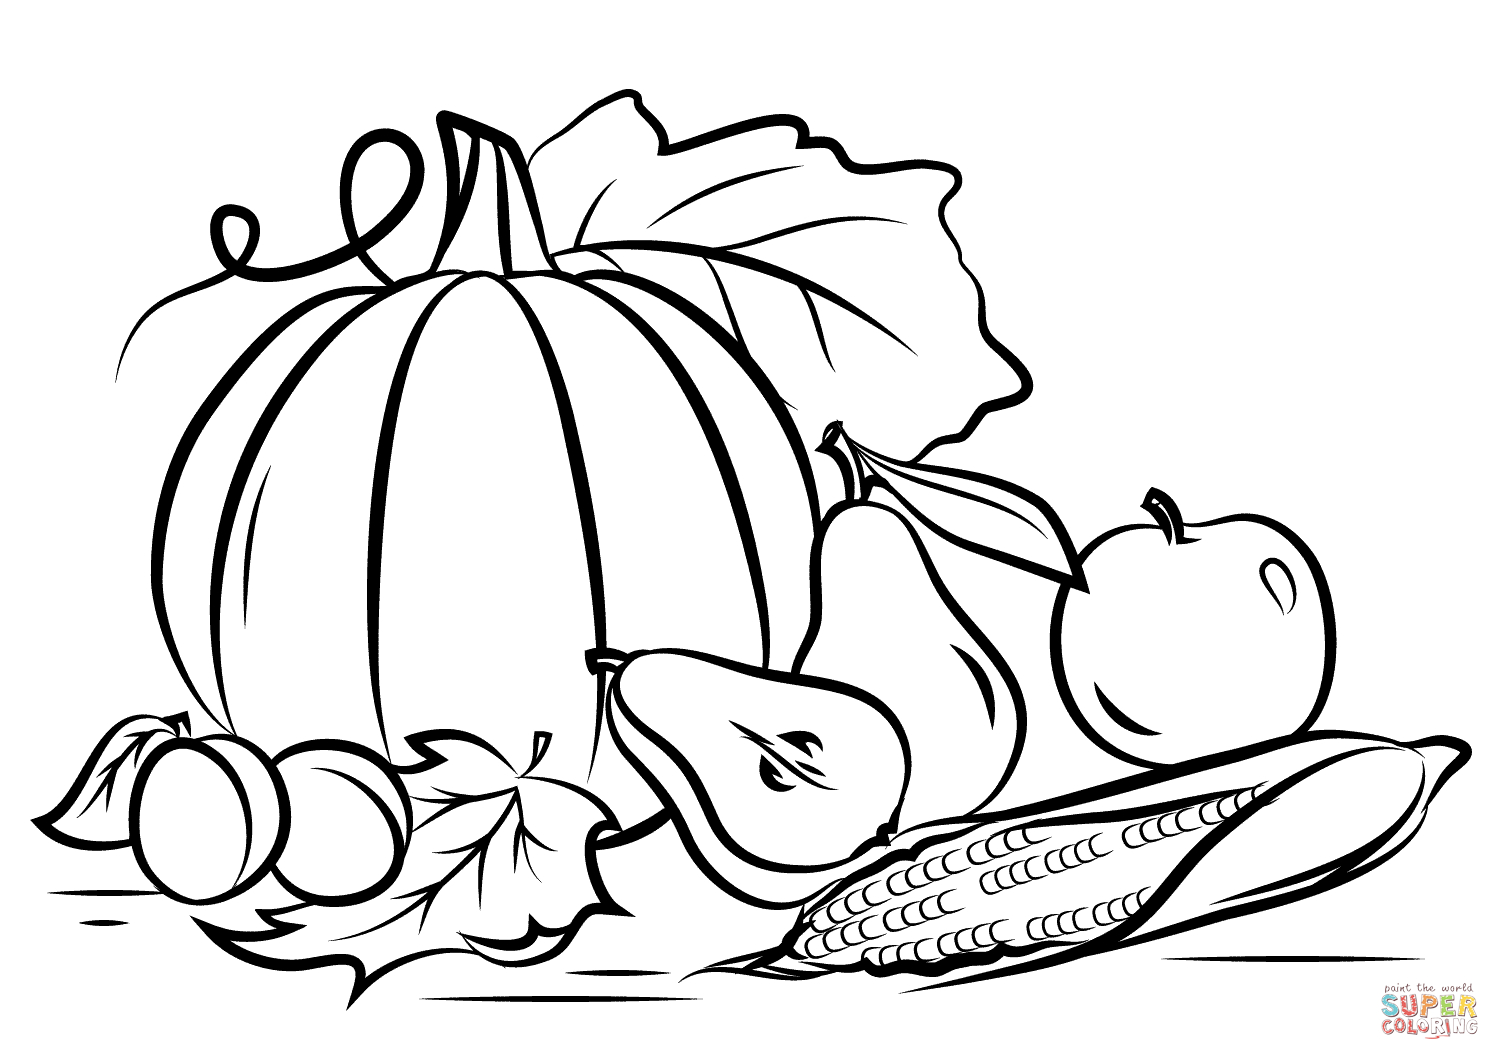 Autumn Harvest Coloring Page | Free Printable Coloring Pages - Free Printable Coloring Sheets